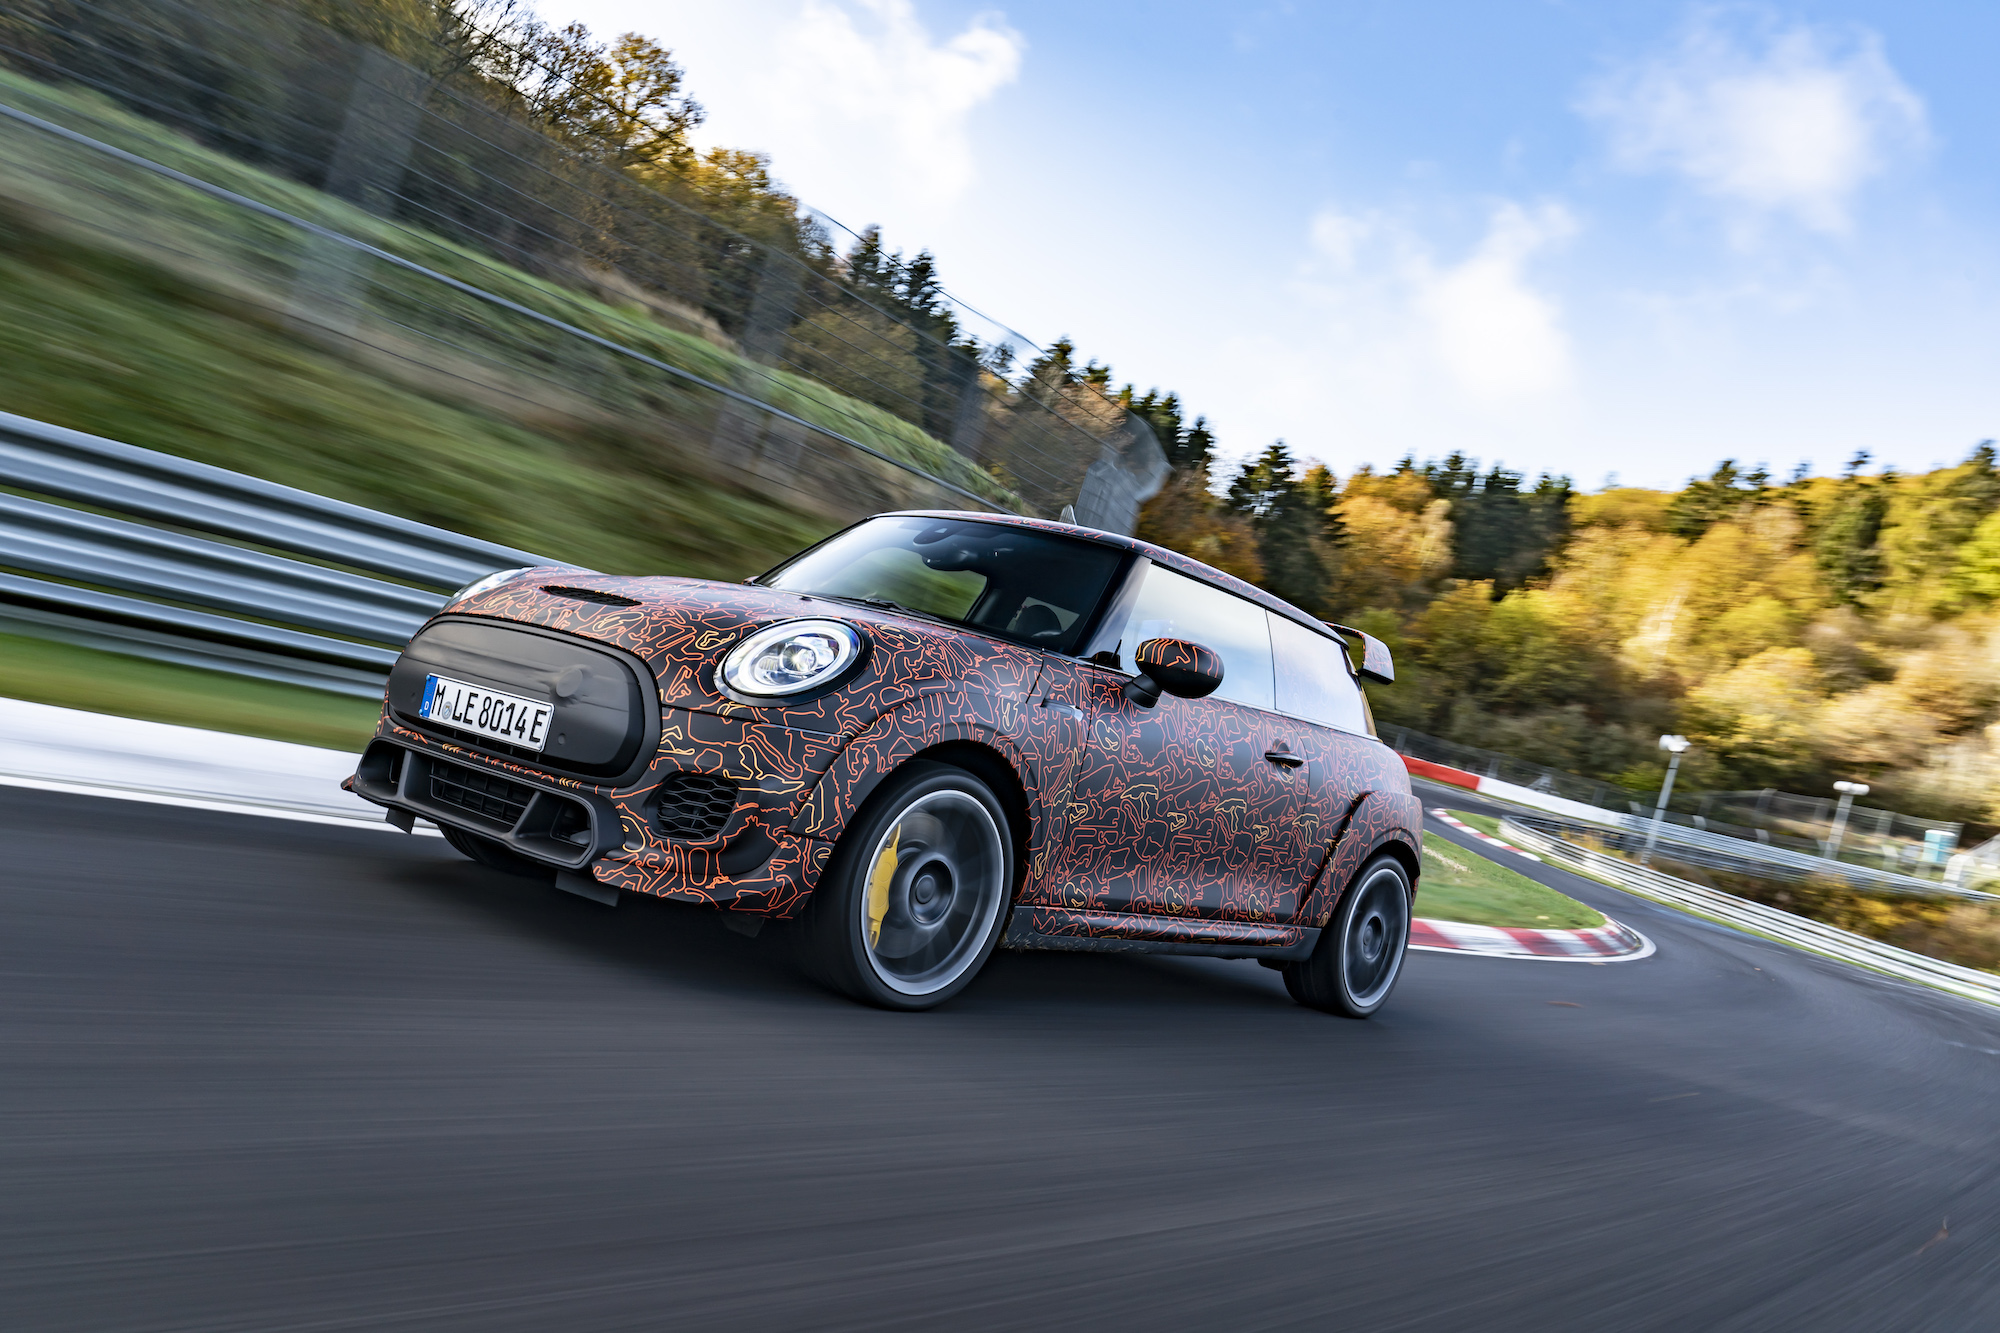 A 2021 Mini John Cooper Works zips around a paved track surrounded by rolling green hills and trees